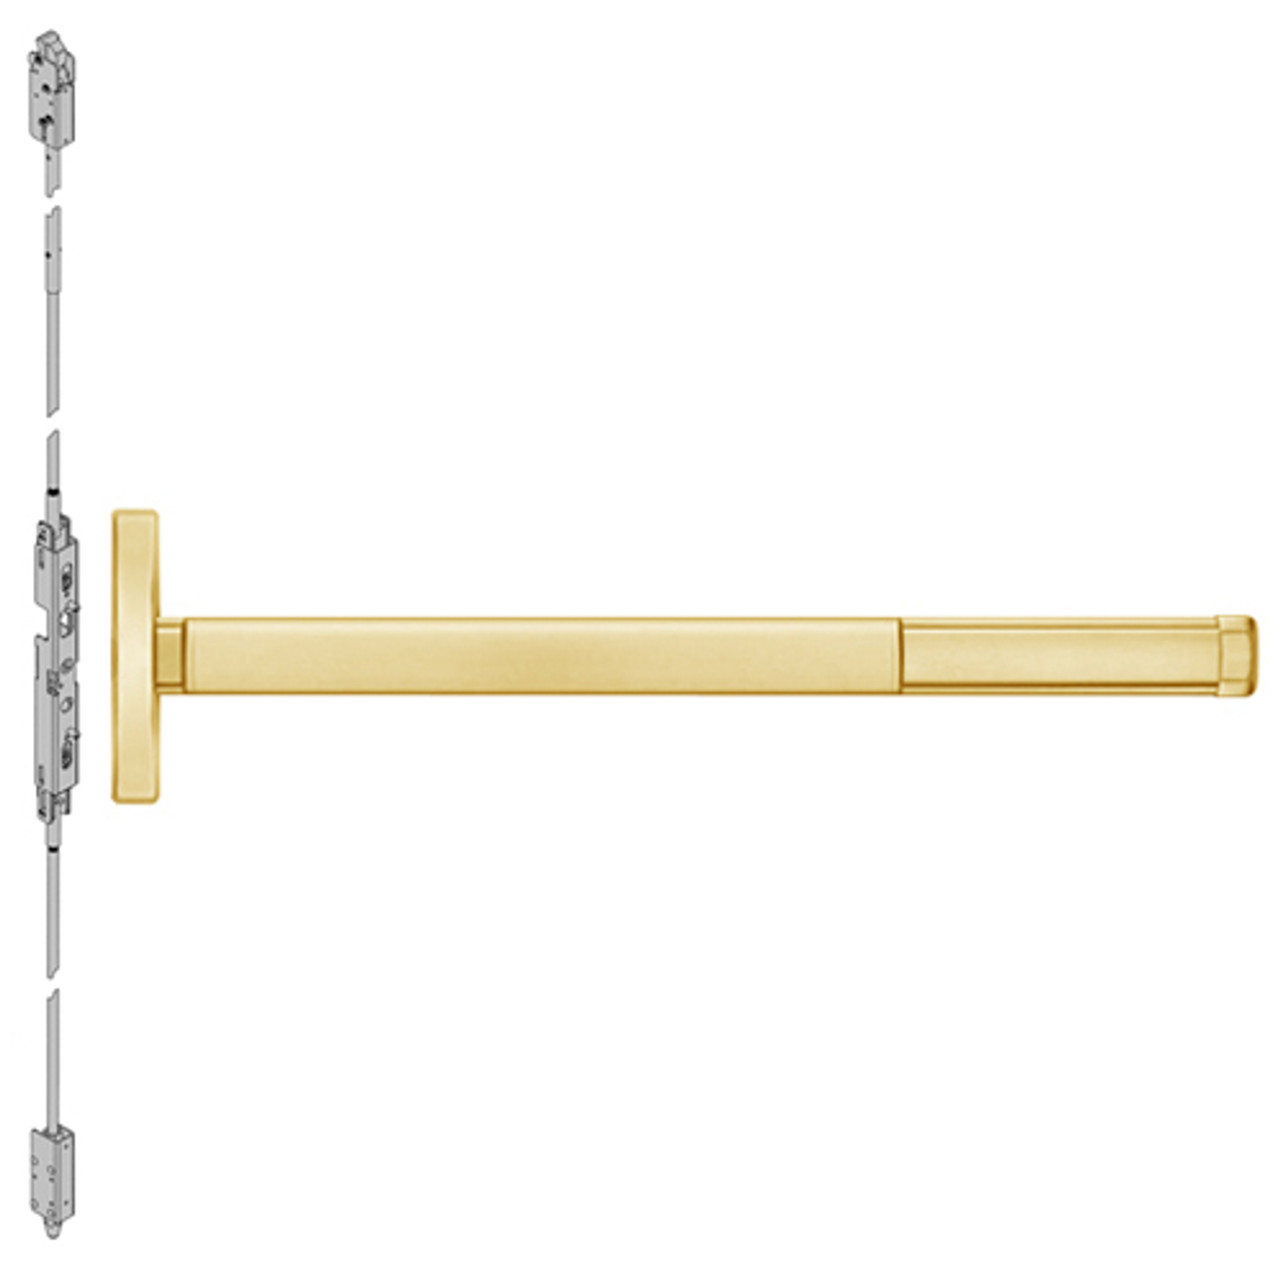 ELR2608-605-48 PHI 2600 Series Concealed Vertical Rod Exit Device with Electric Latch Retraction Prepped for Key Controls Lever in Bright Brass Finish